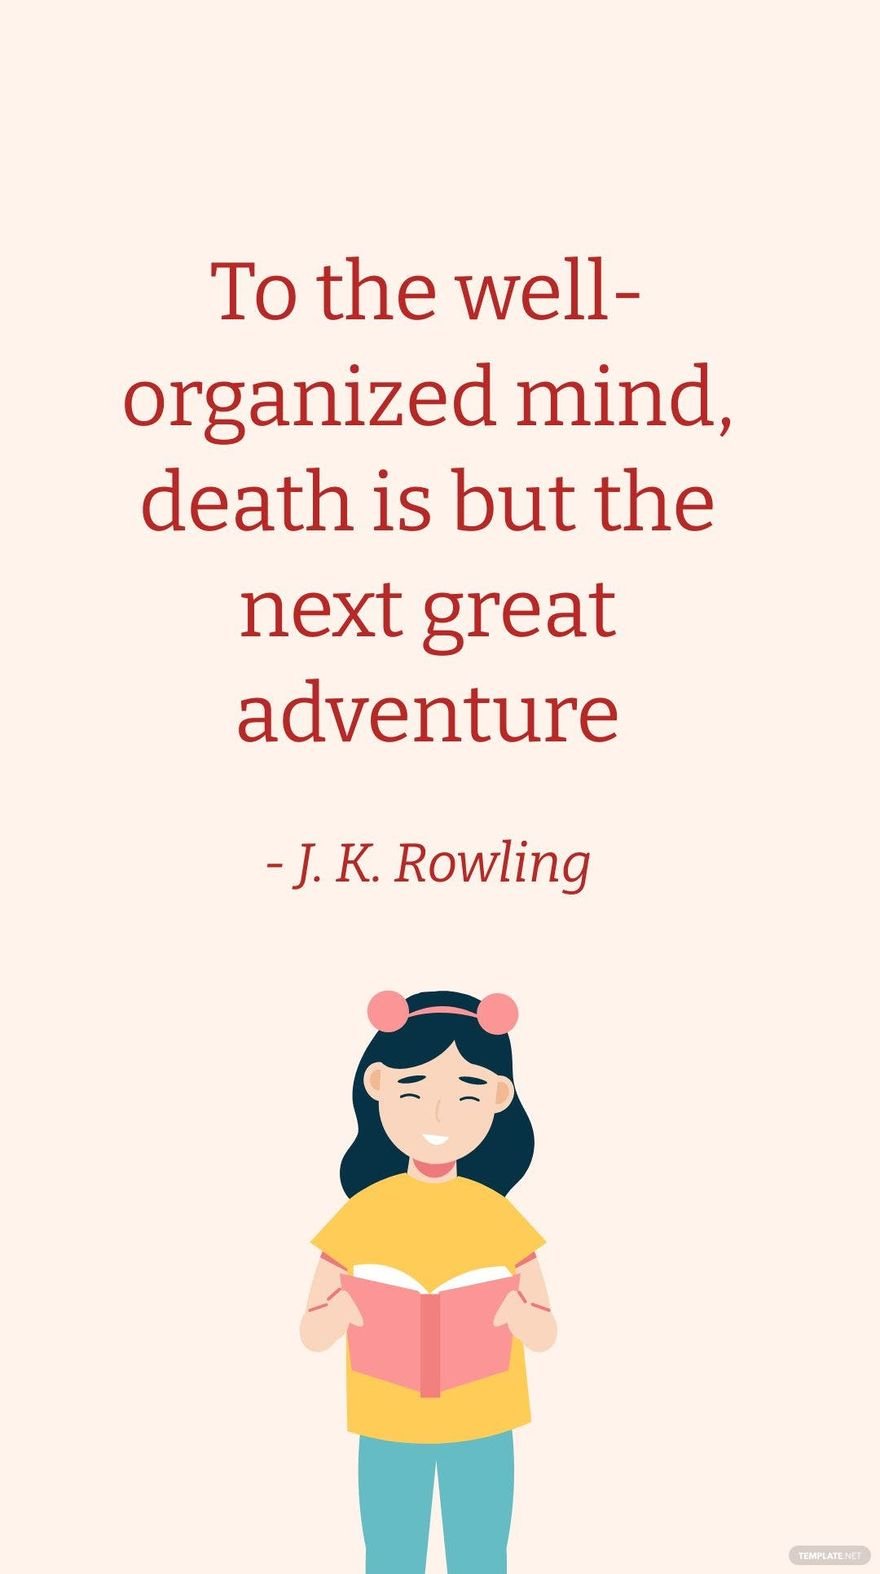 Free J. K. Rowling - To the well-organized mind, death is but the next great adventure in JPG